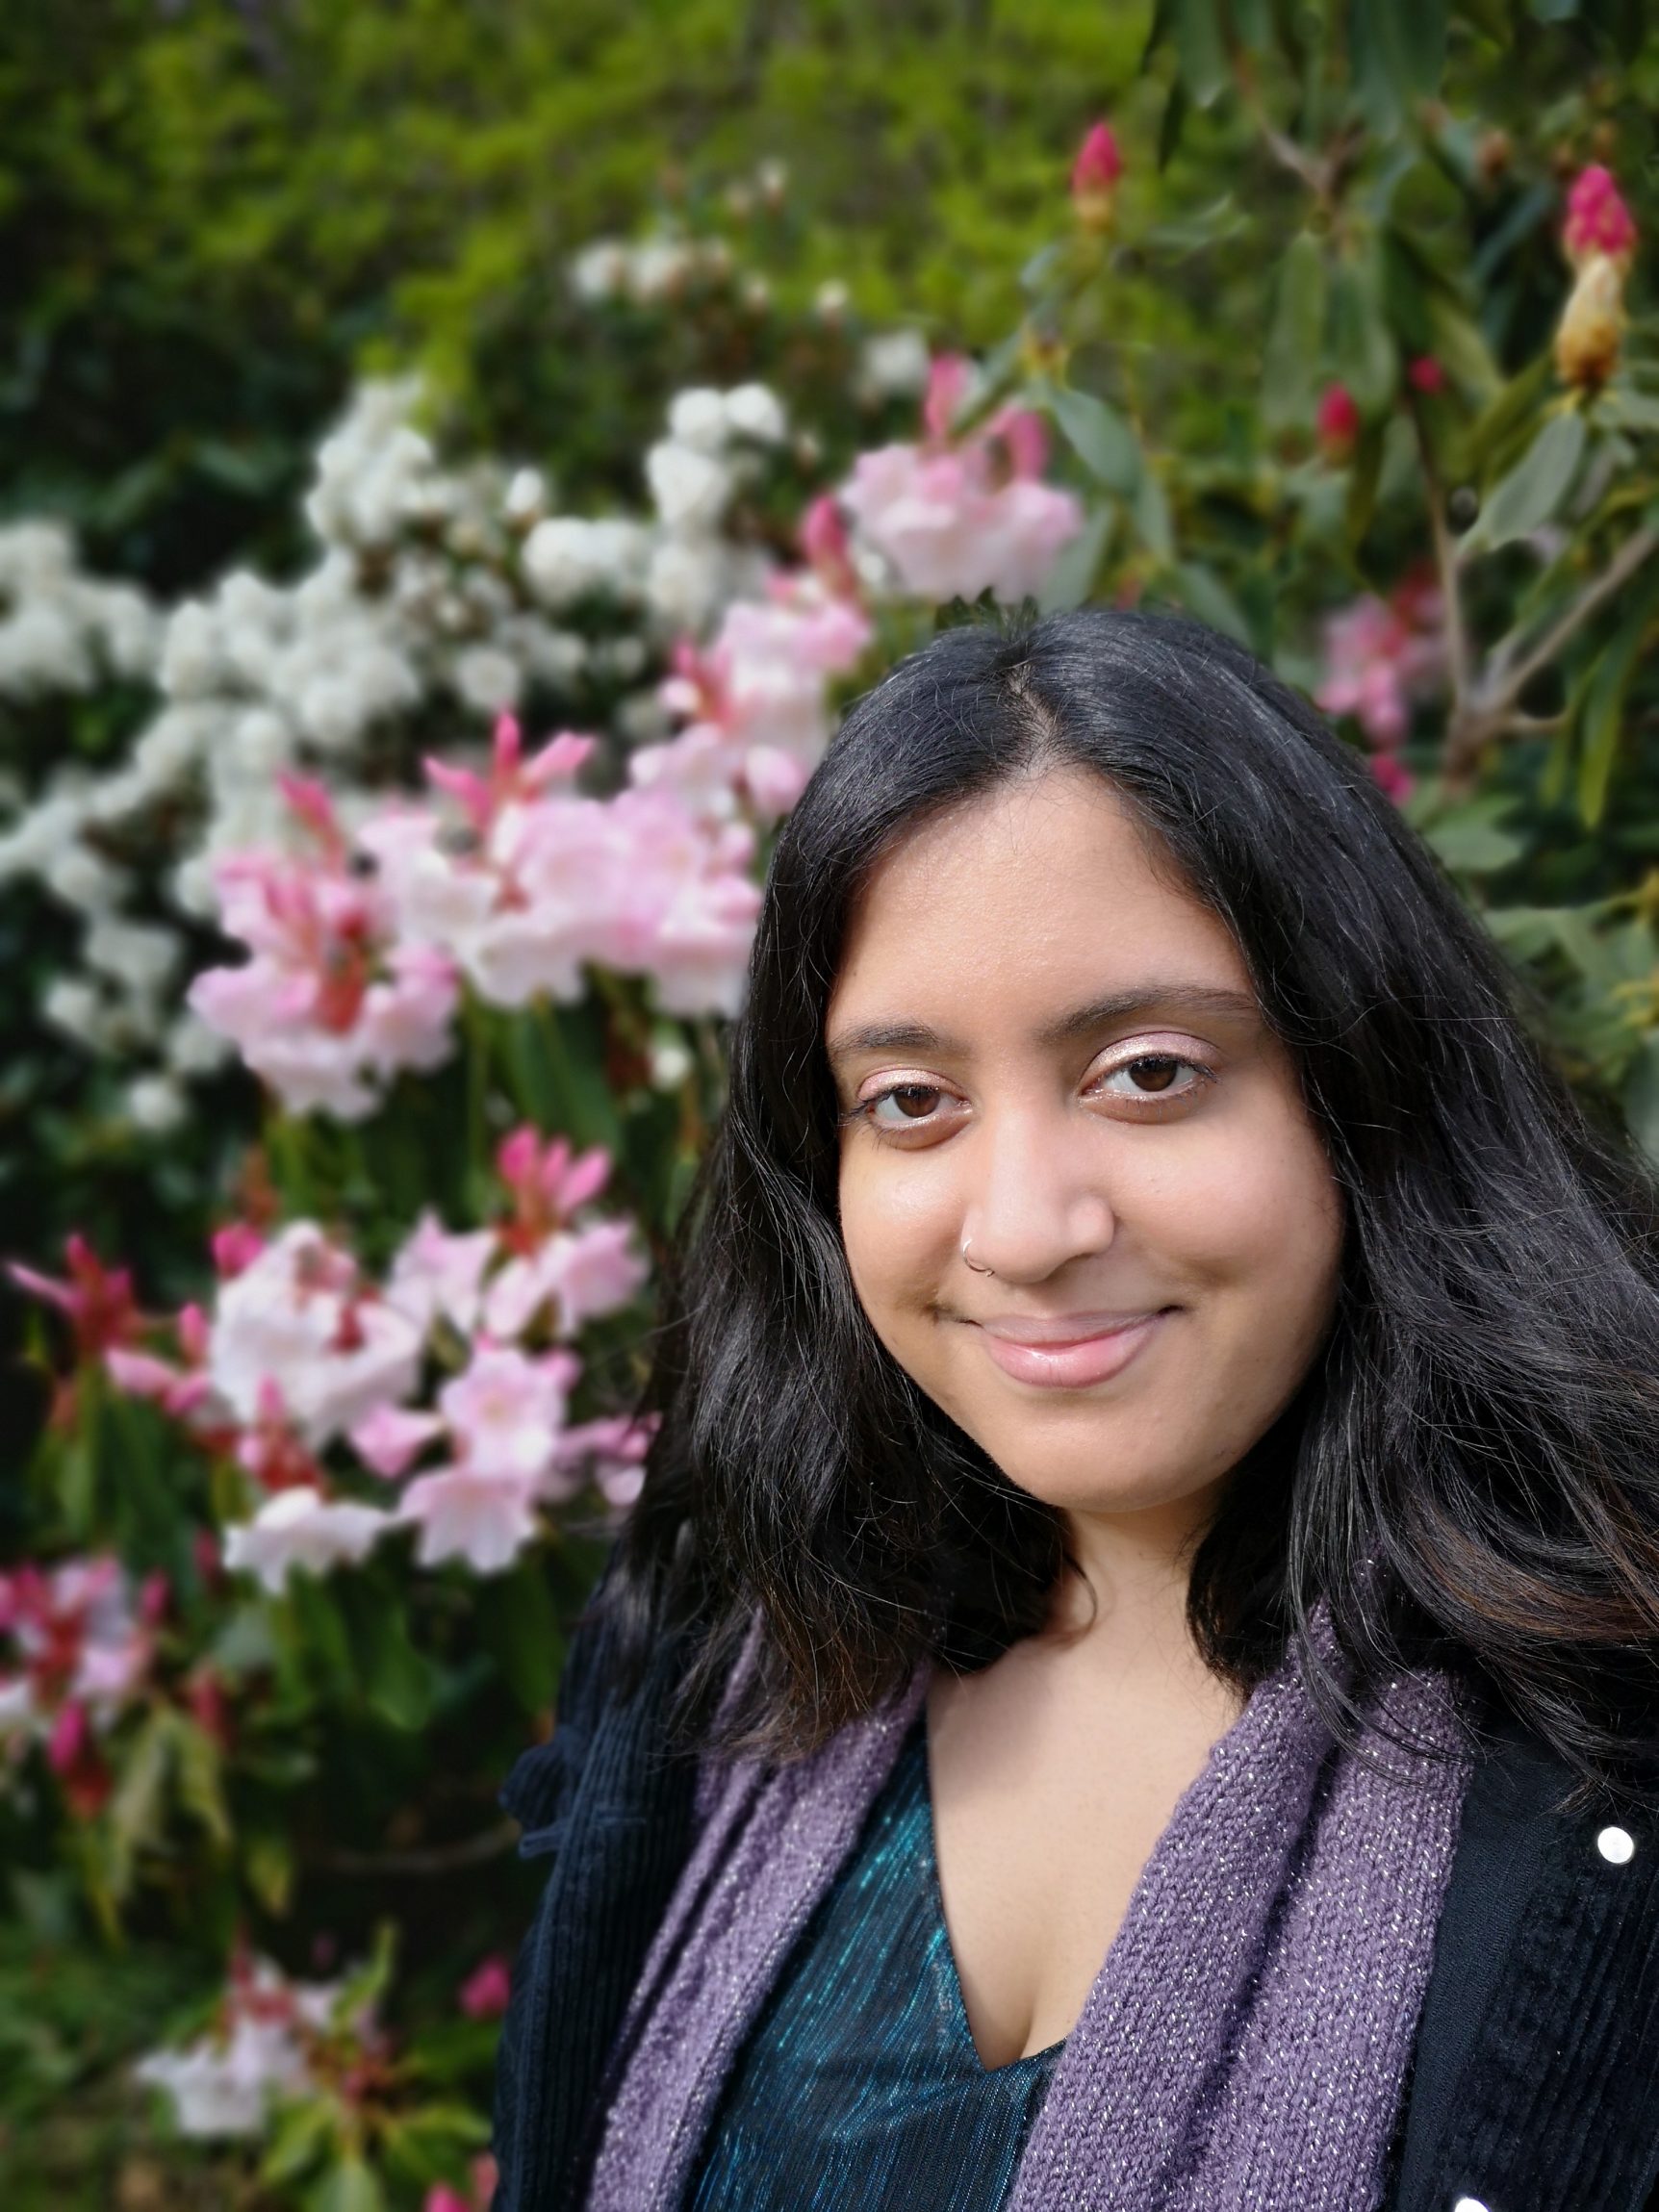 Composer Nikki Sheth faces the camera smiling in front of pink, red and white flowers and green foliage.